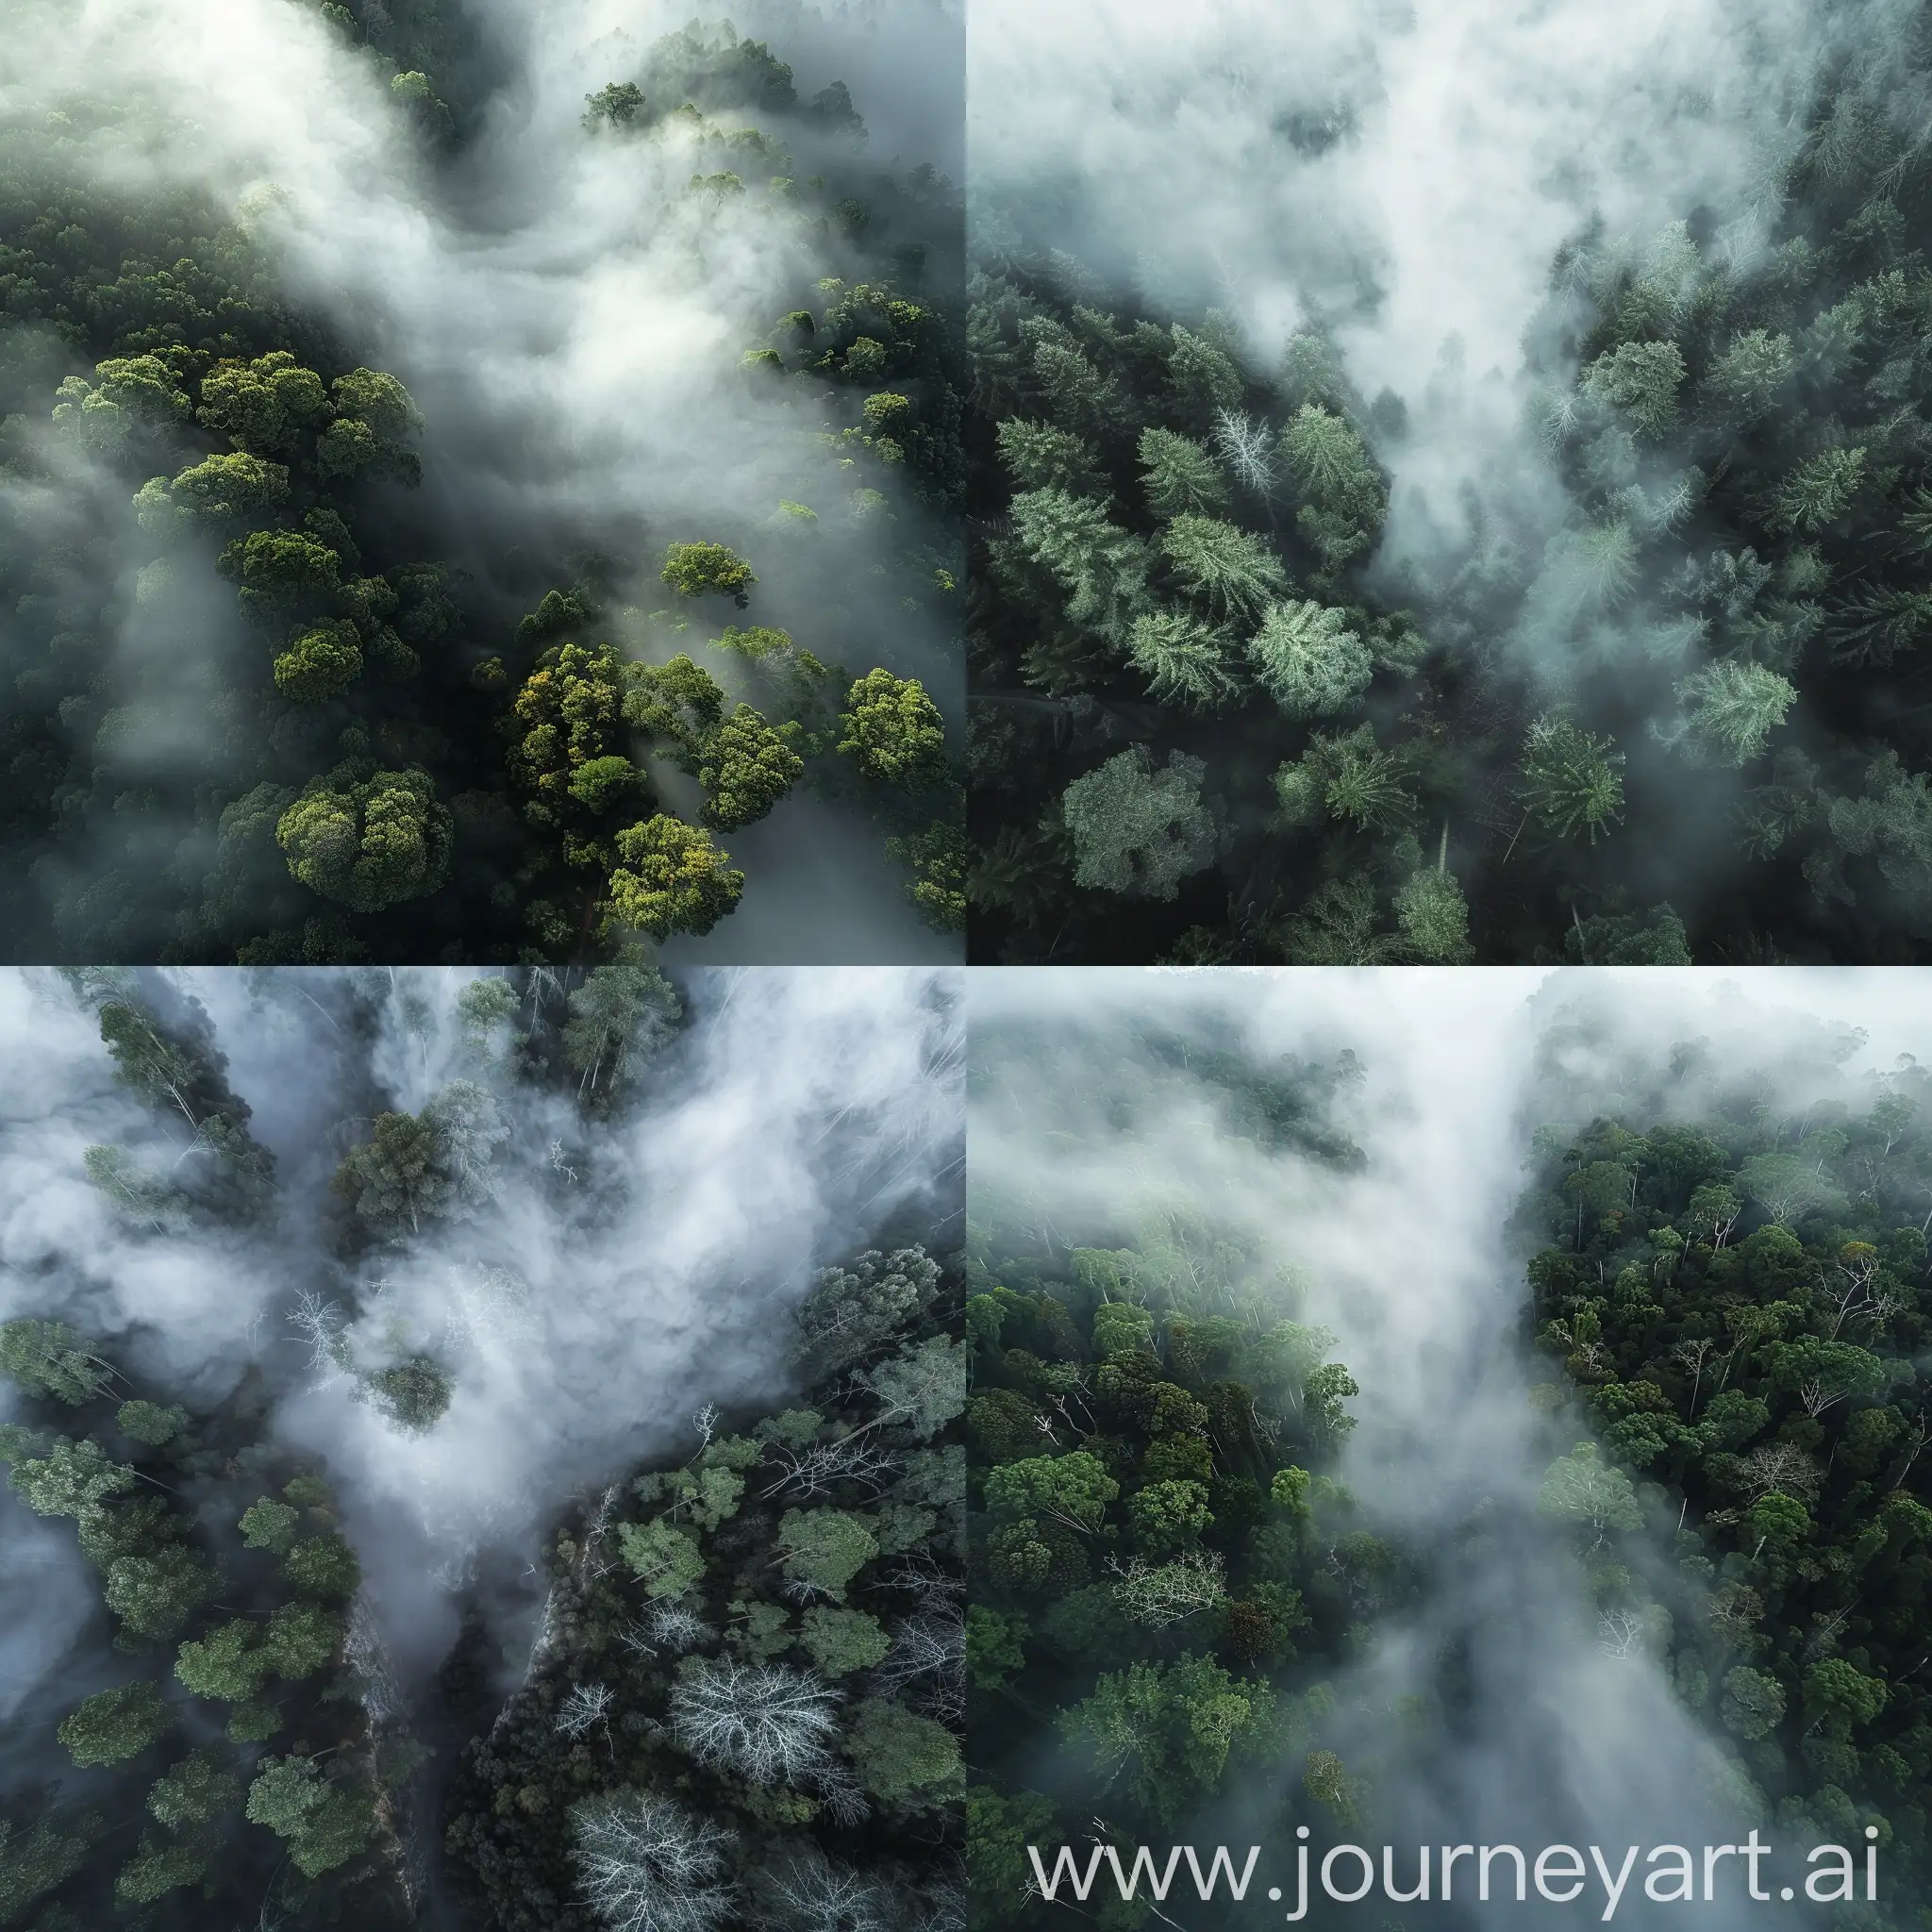 the fog engulfs the forest, trees are visible on the left and right, the ground is visible below, the fog completely covers the forest from above and to the middle, view from above, gloomy atmosphere